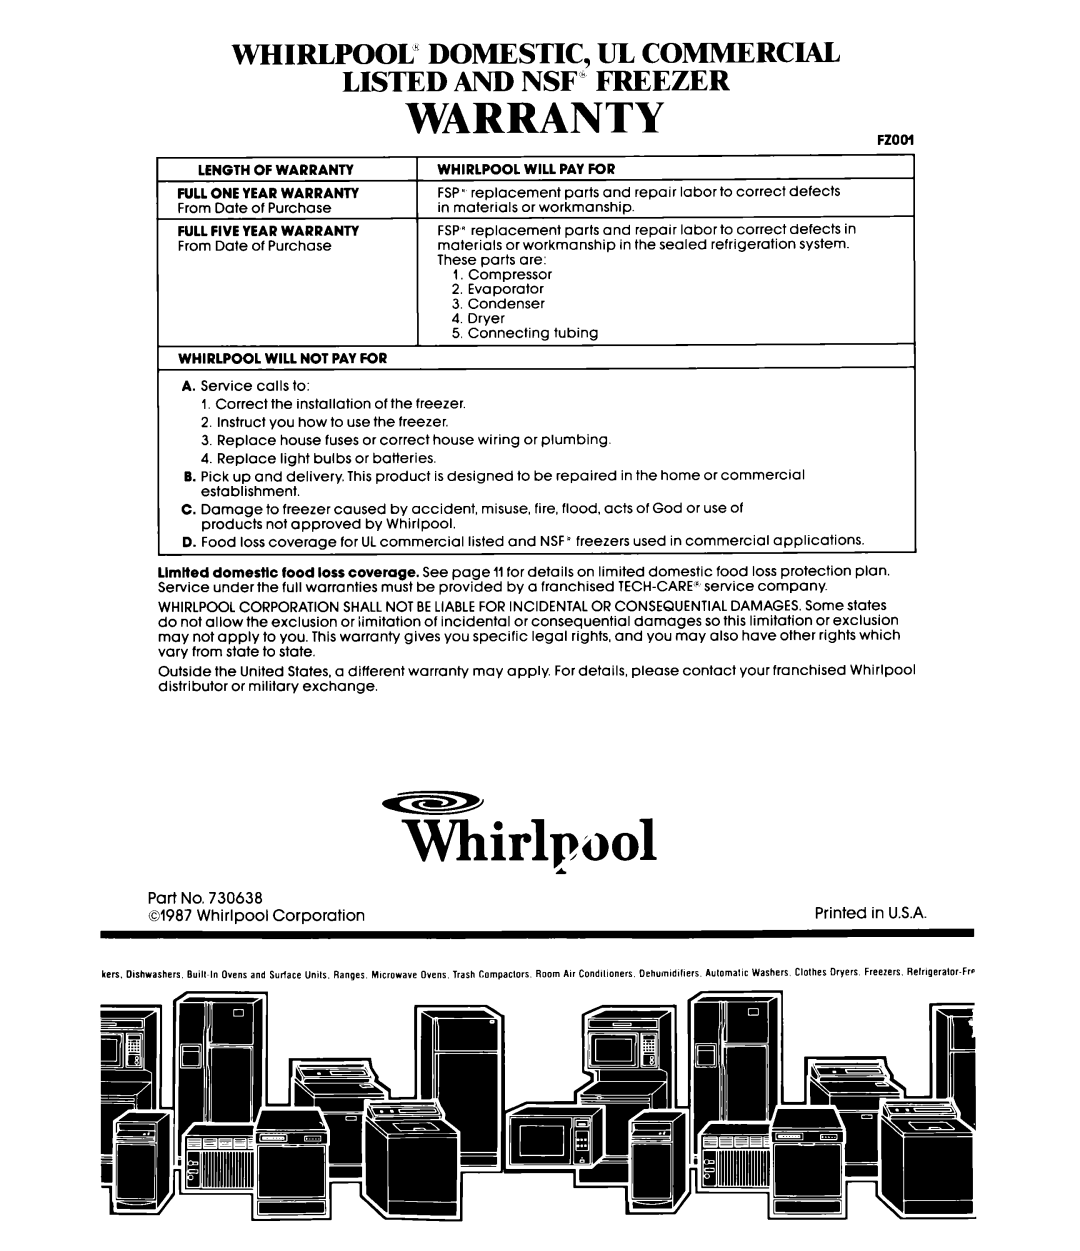 Whirlpool EV0G0F manual Warranty, Whirlpool” Domestic, Ul Commercial, Listed And Nsf” Freezer 